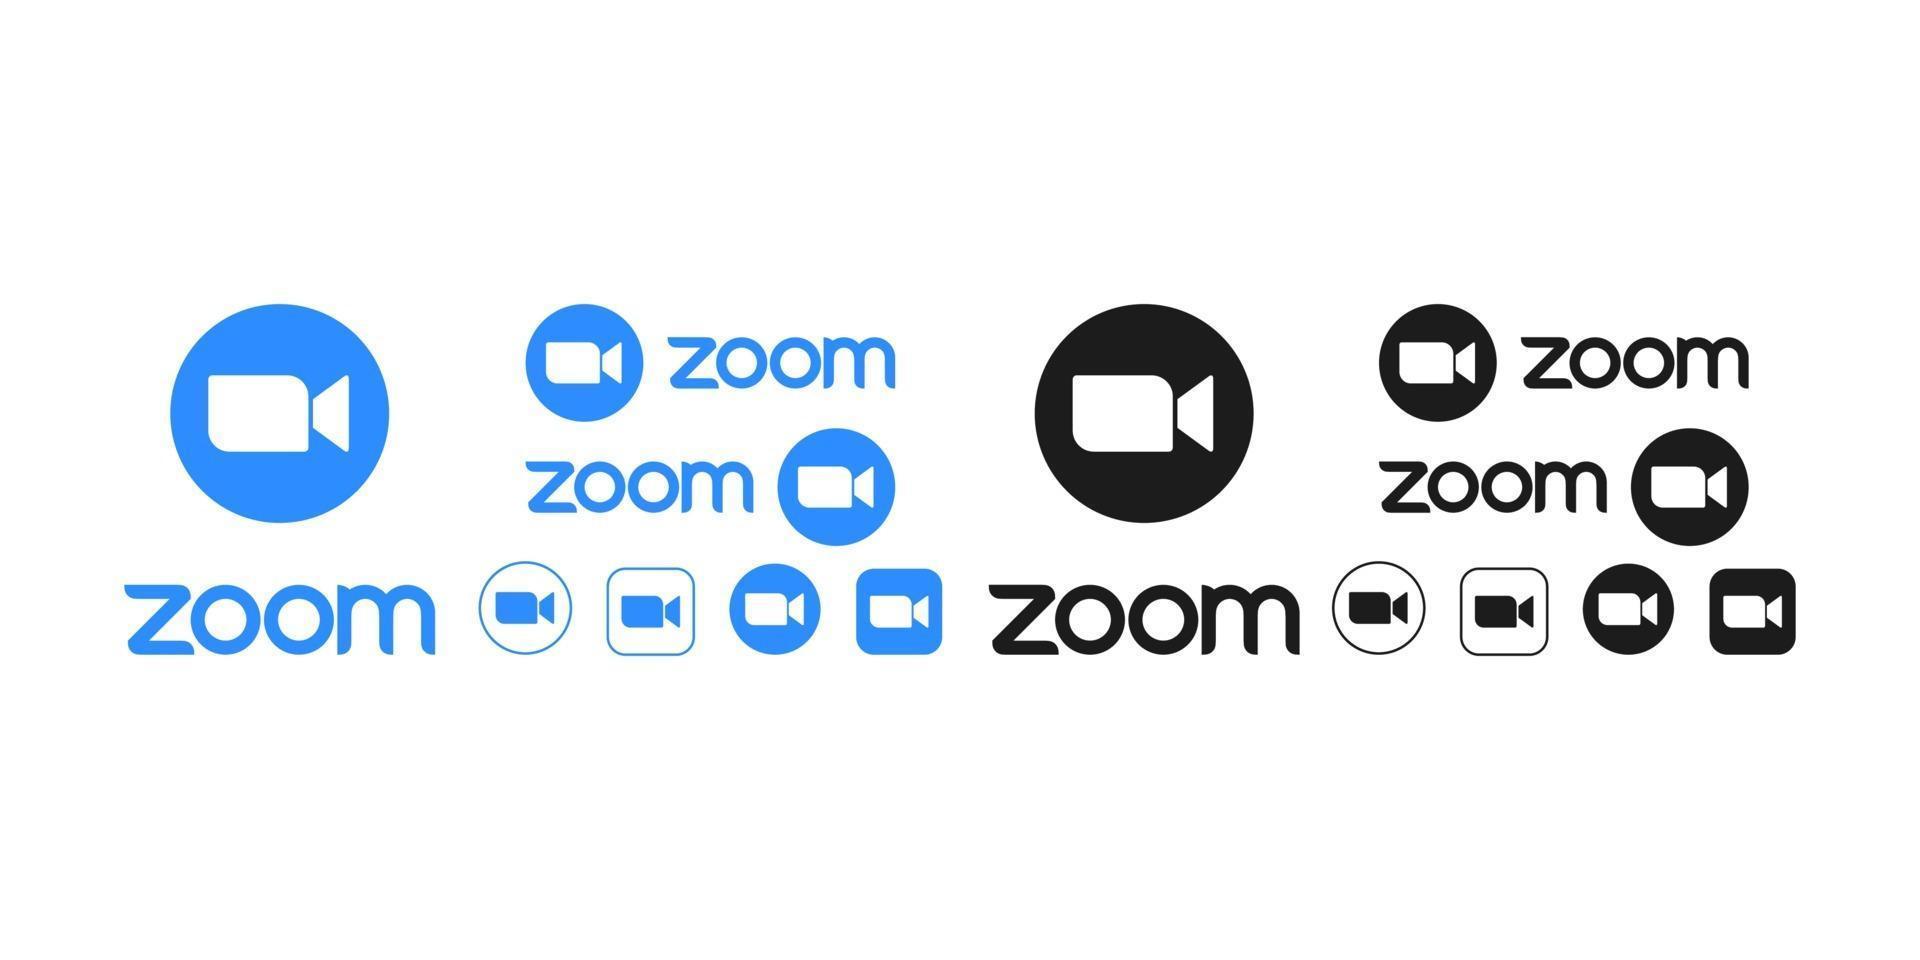 Zoom video call meeting app icon set vector